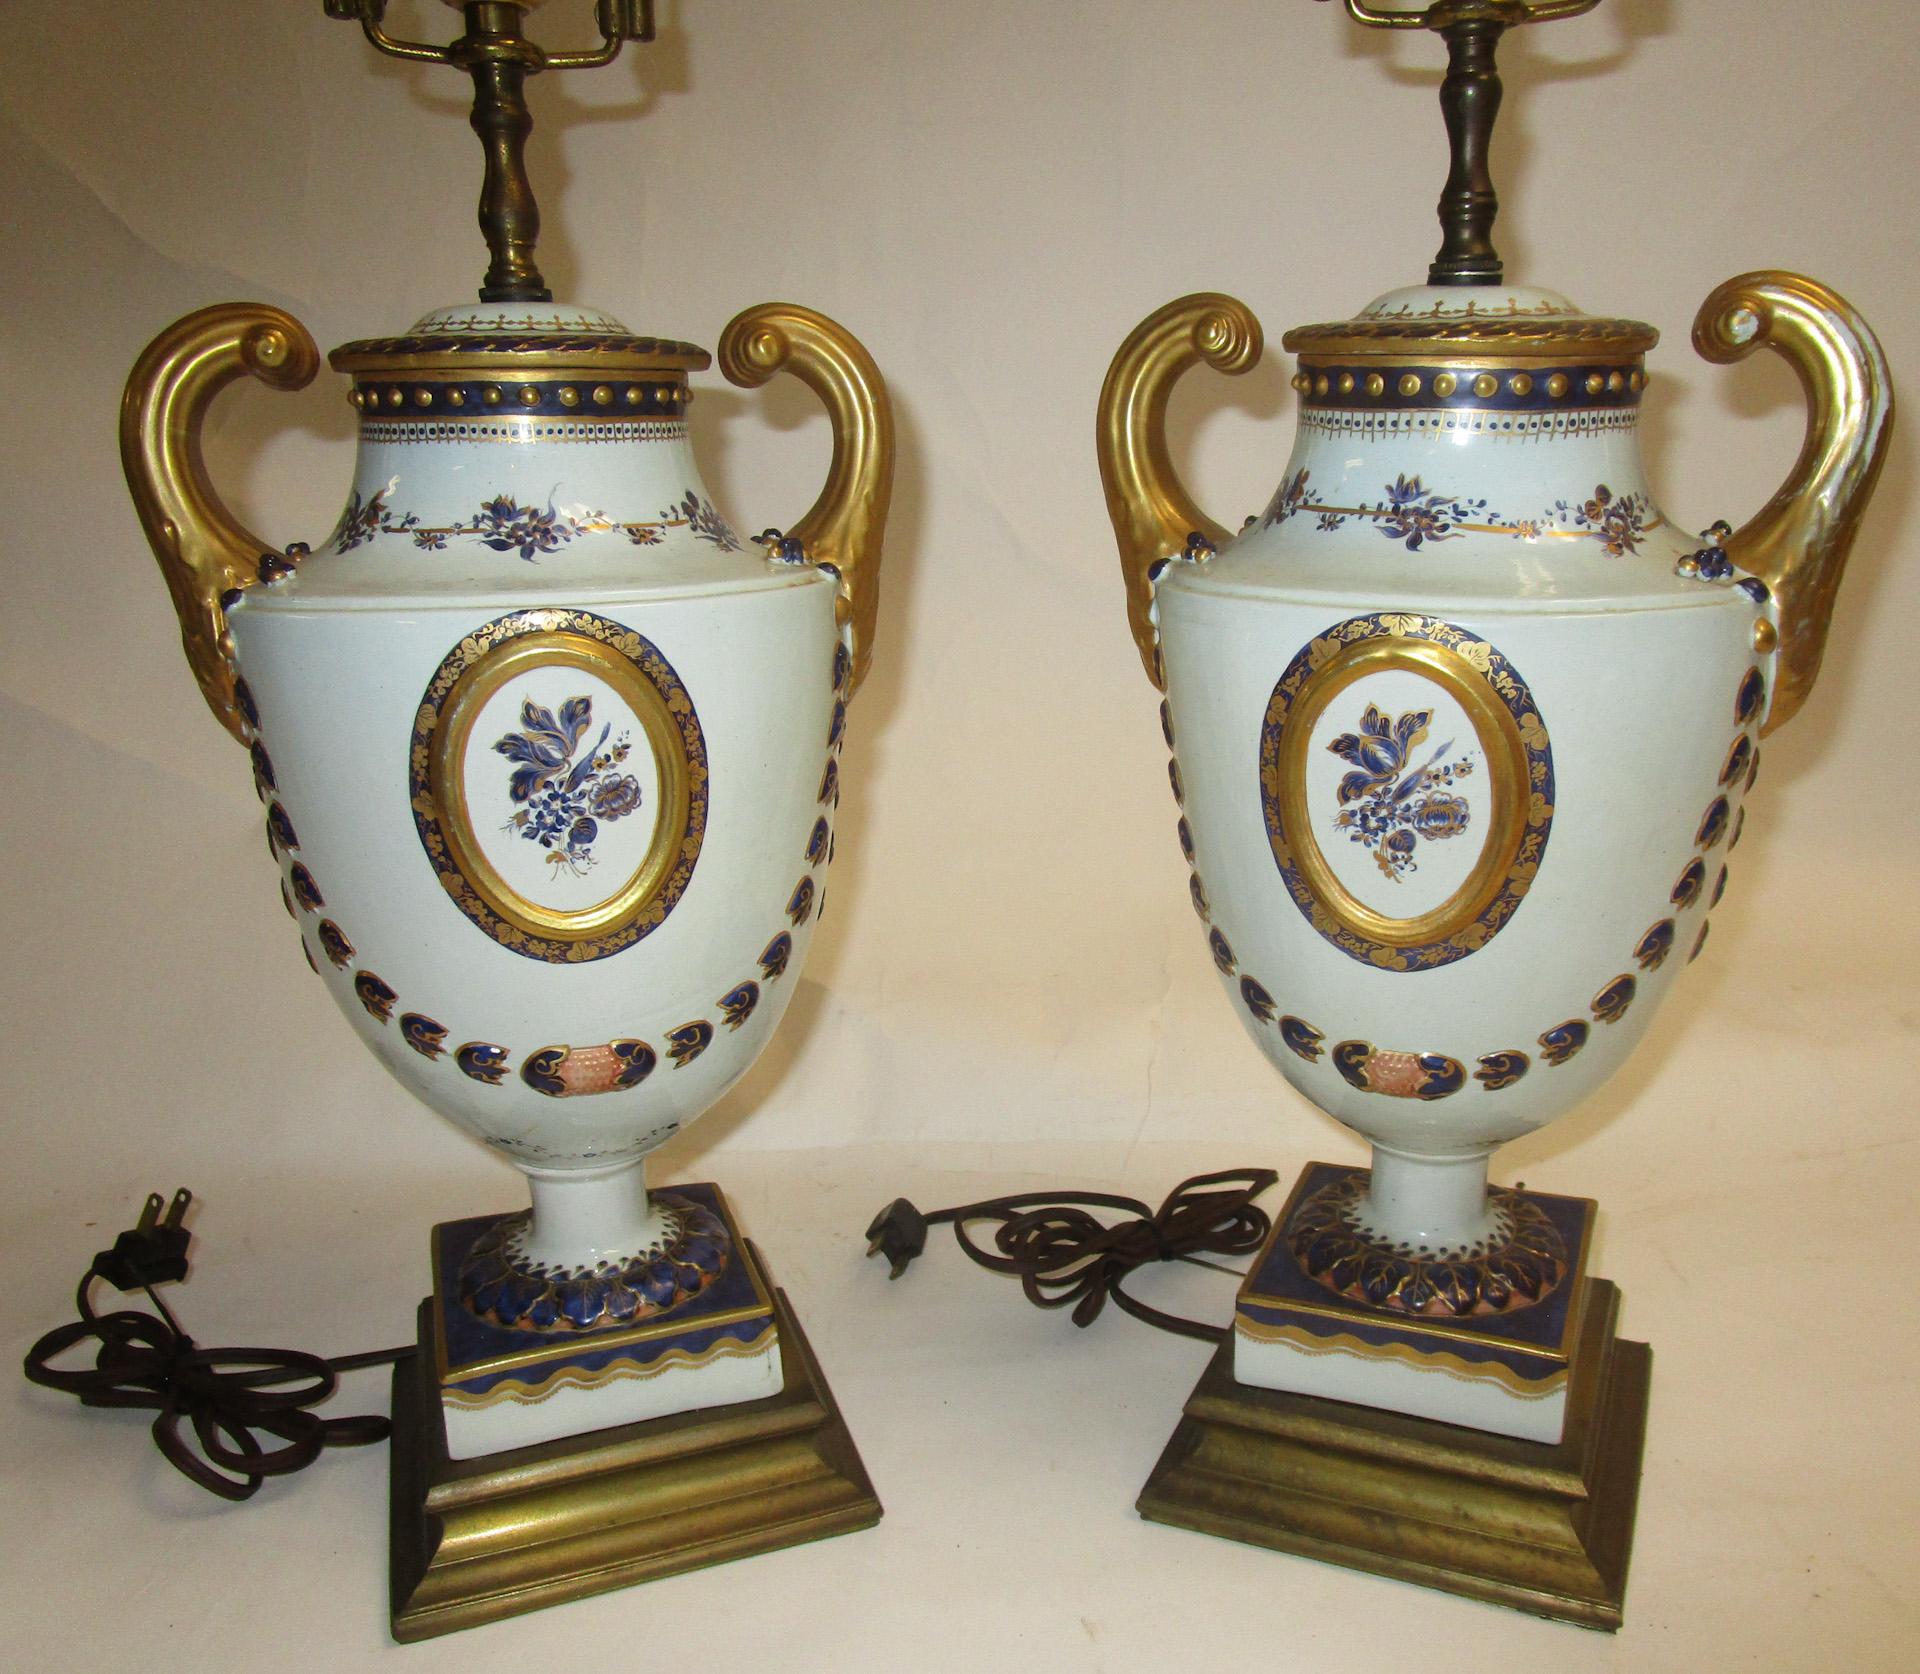 This handsome pair of Mottahedeh cobalt and white porcelain urn lamps feature central floral medallions surrounded by raised bellflower swags, hand-painted and parcel gilt, and are mounted on 5.5 inch square brass bases. Porcelain artichoke finials.